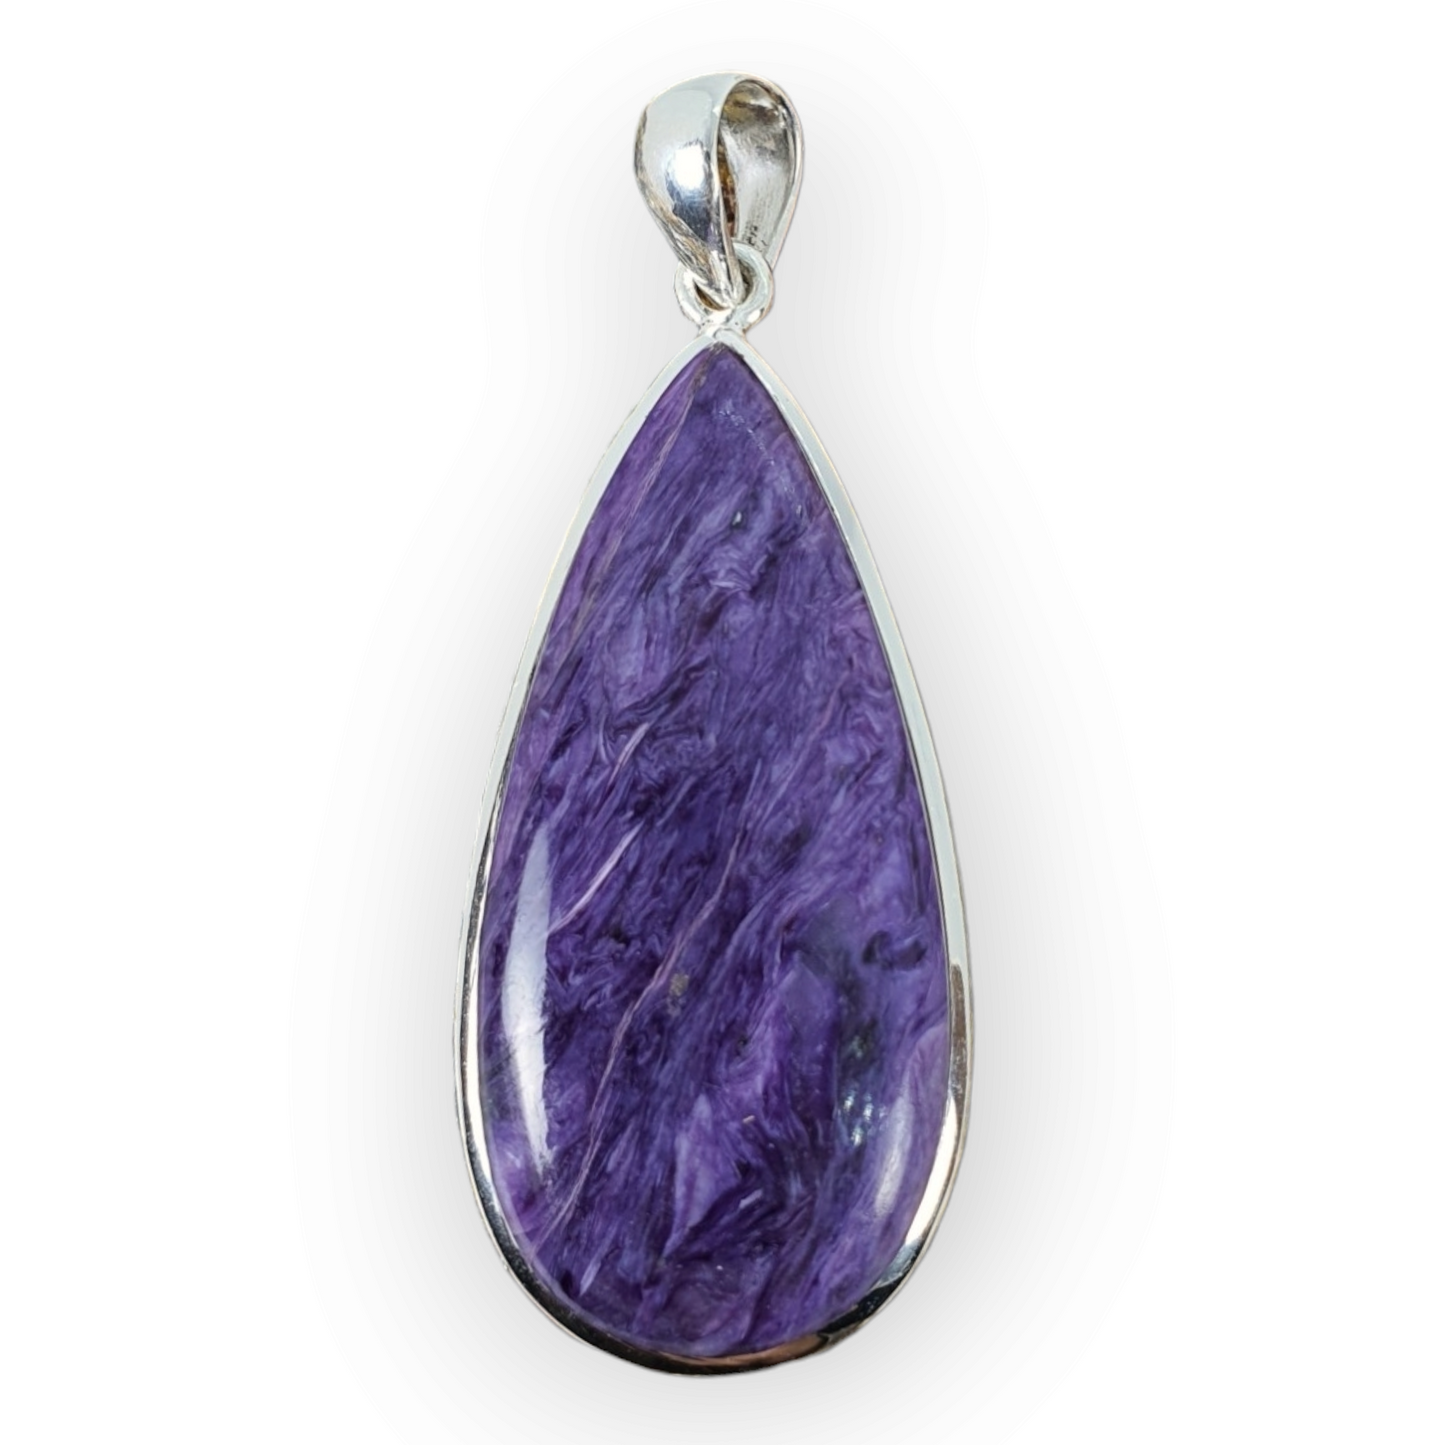 Crystals - Charoite Pendant - Sterling Silver